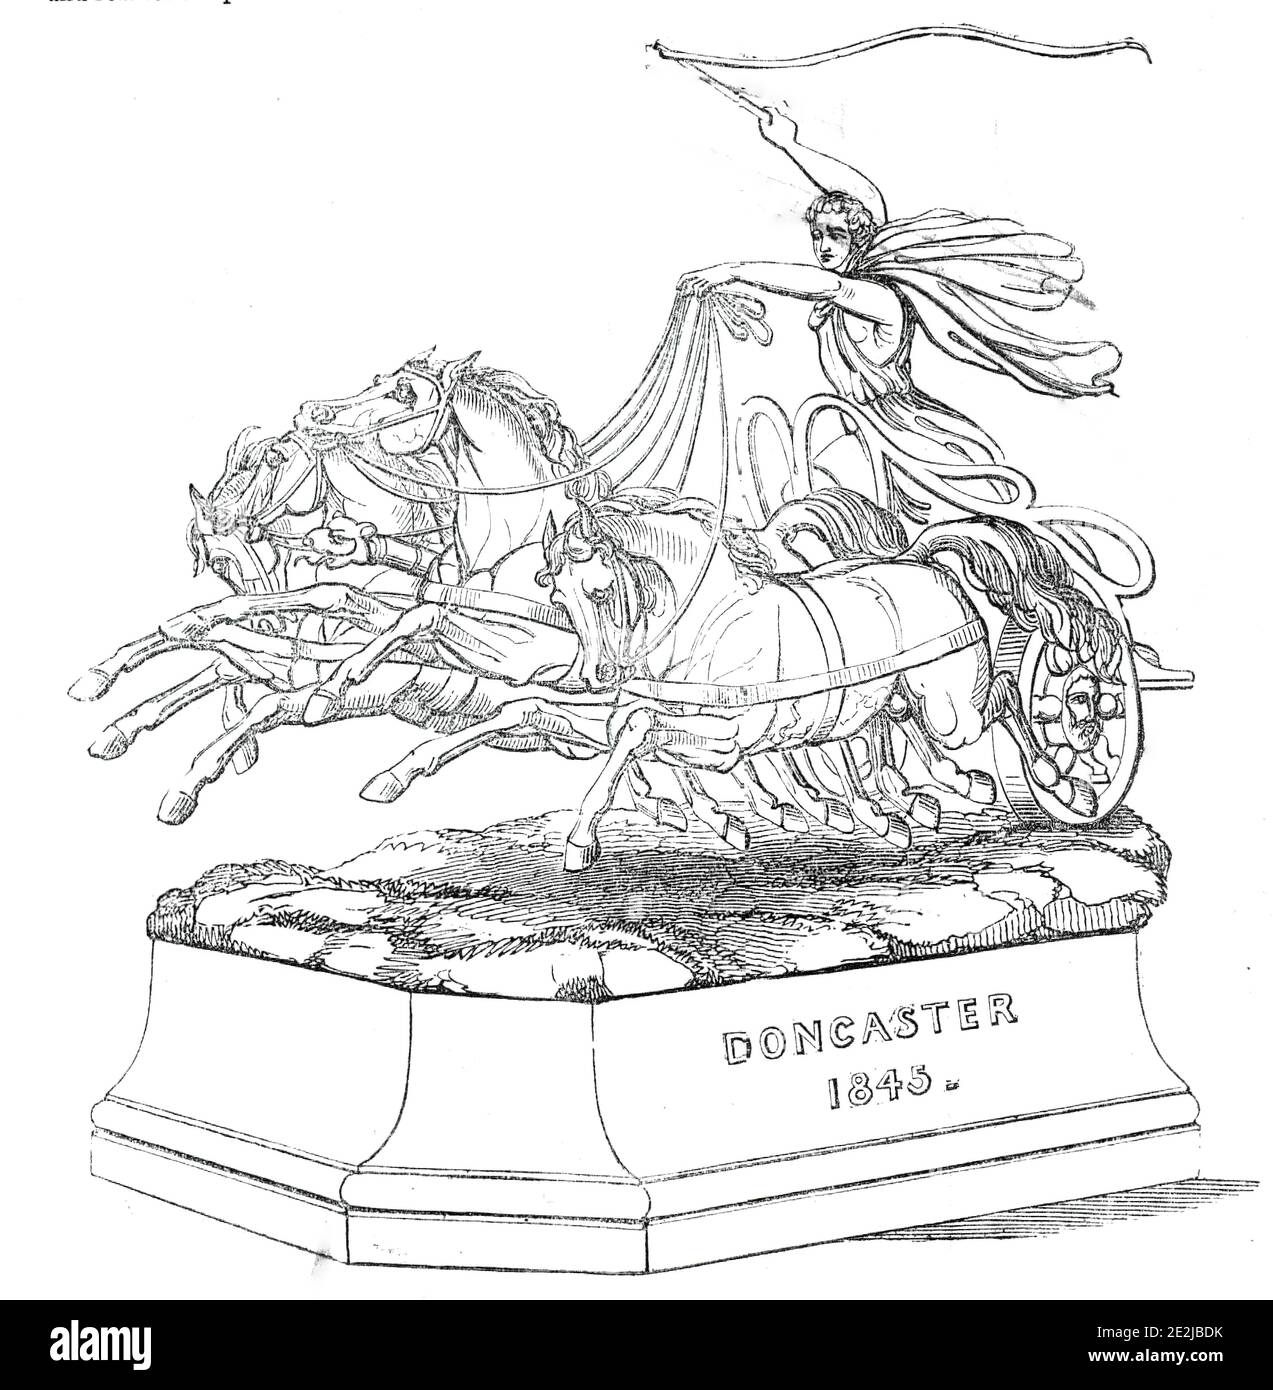 The Doncaster Cup, 1845. 'The design for this magnificent prize-plate is stated to have been suggested by the Right Honourable Earl Spencer; and it bears the impress of his truly classic mind. The composition represents Diomed in one of the ancient quadrigae, or four-horsed chariots and driver, at full speed...the fields in the group being bright green, and contrasting well with the silver-work and black marble base...The anatomical beauty of the horse, his muscular powers, and proportions, are admirably displayed. The design was sketched by Frank Howard; the horses were grouped by Macarthy; a Stock Photo